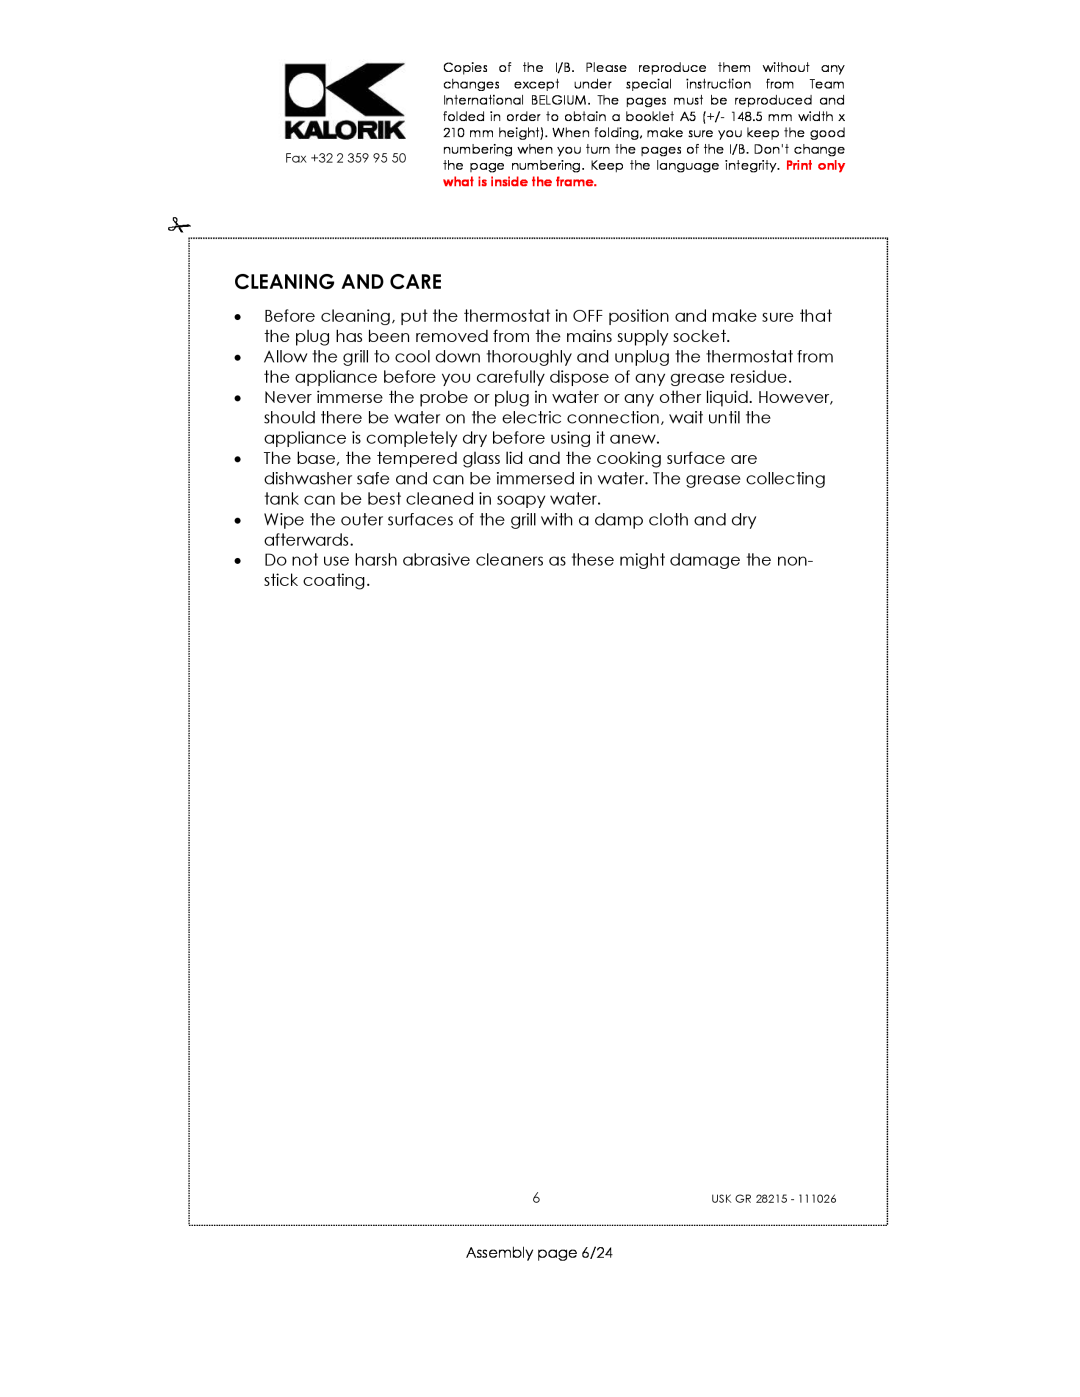 Kalorik USK GR 28215 manual Cleaning And Care, Assembly page 6/24 